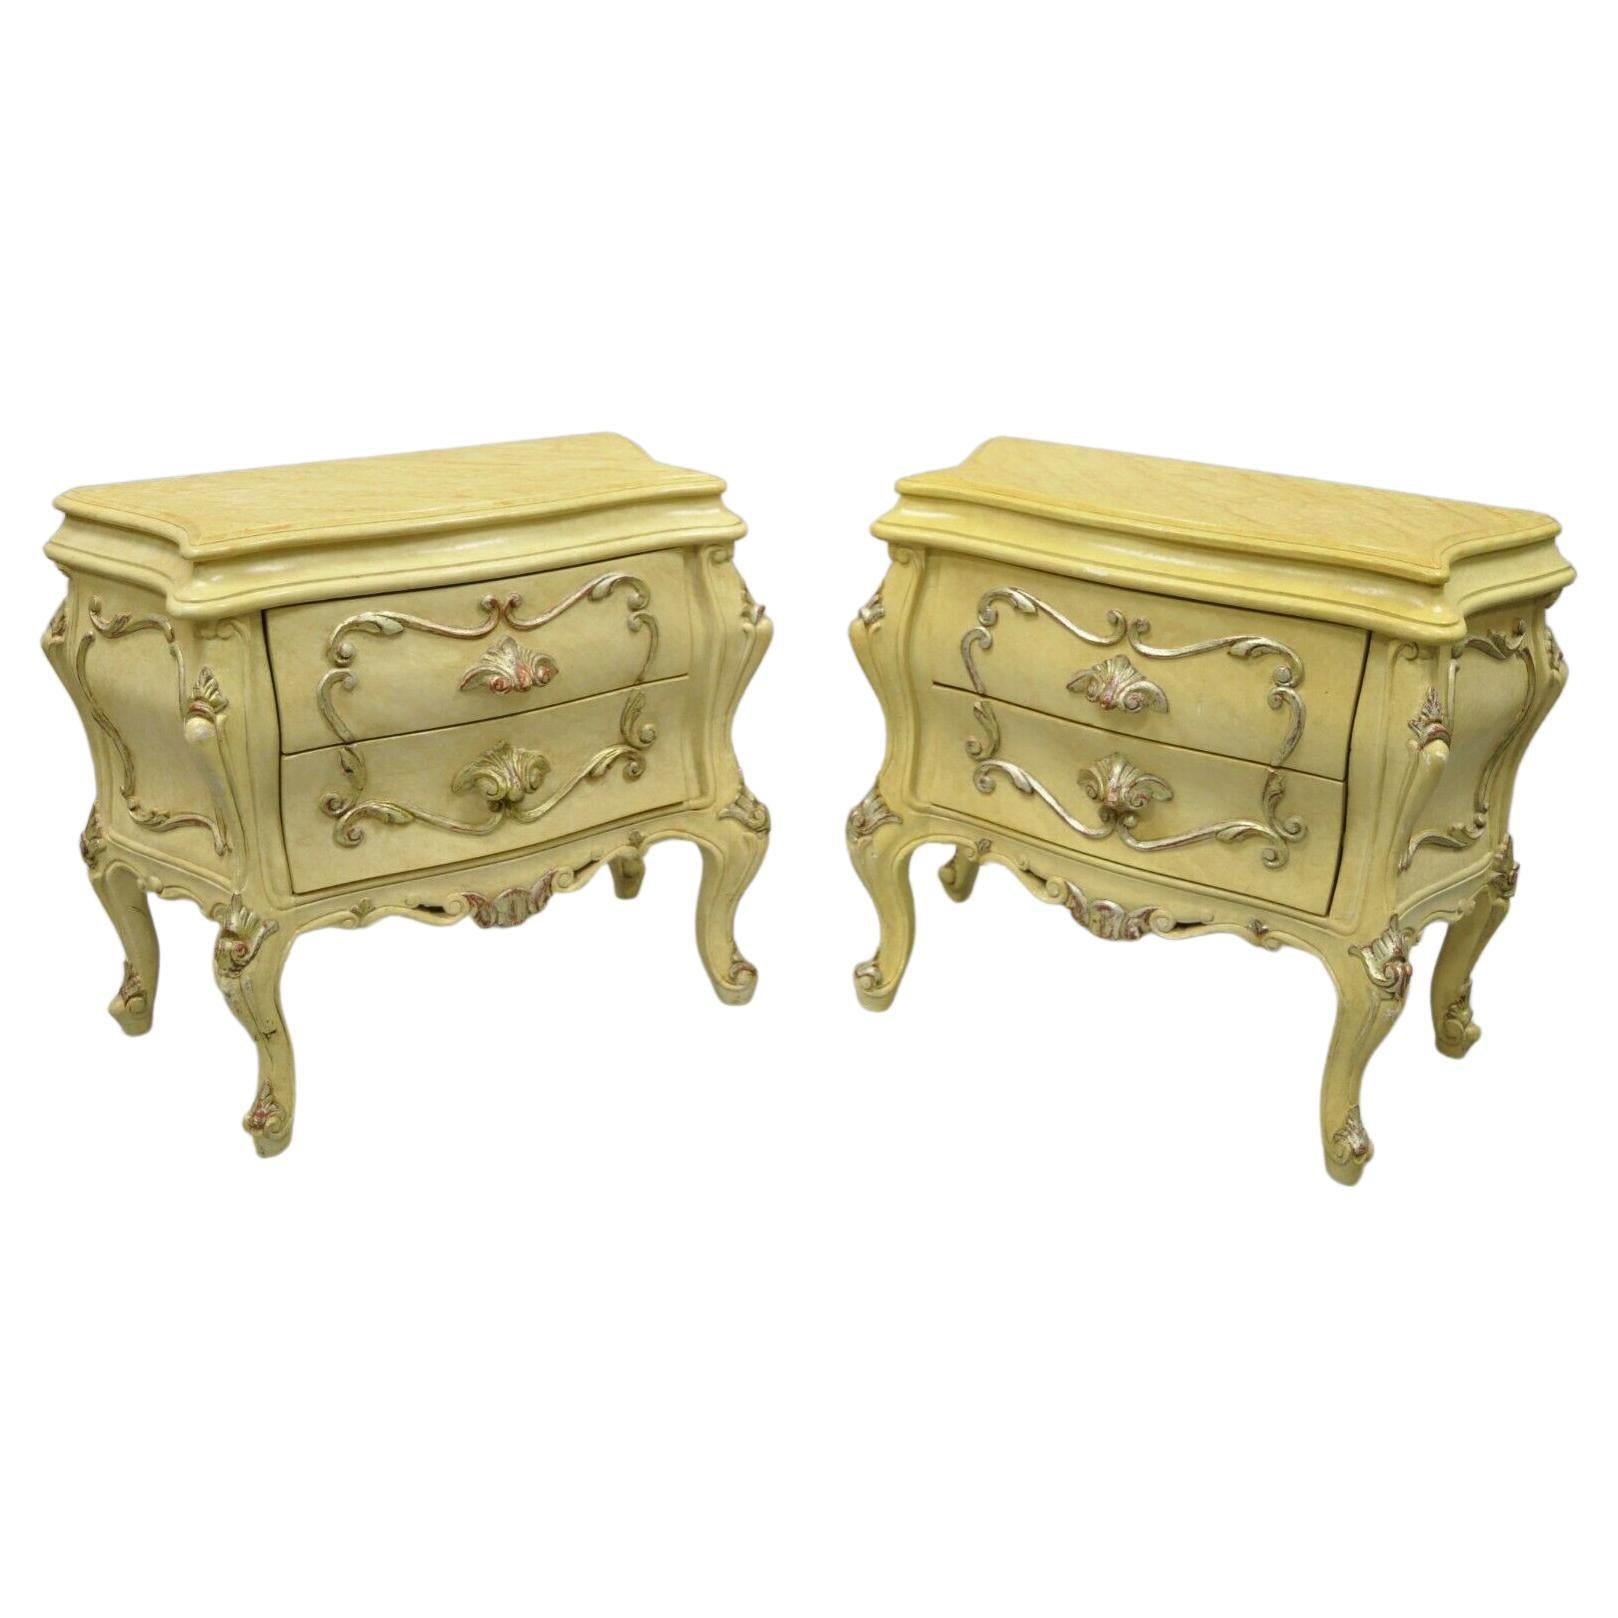 Italian Rococo Cream Lacquer 2 Drawer Nightstands Bombe Bedside Commode, a Pair For Sale